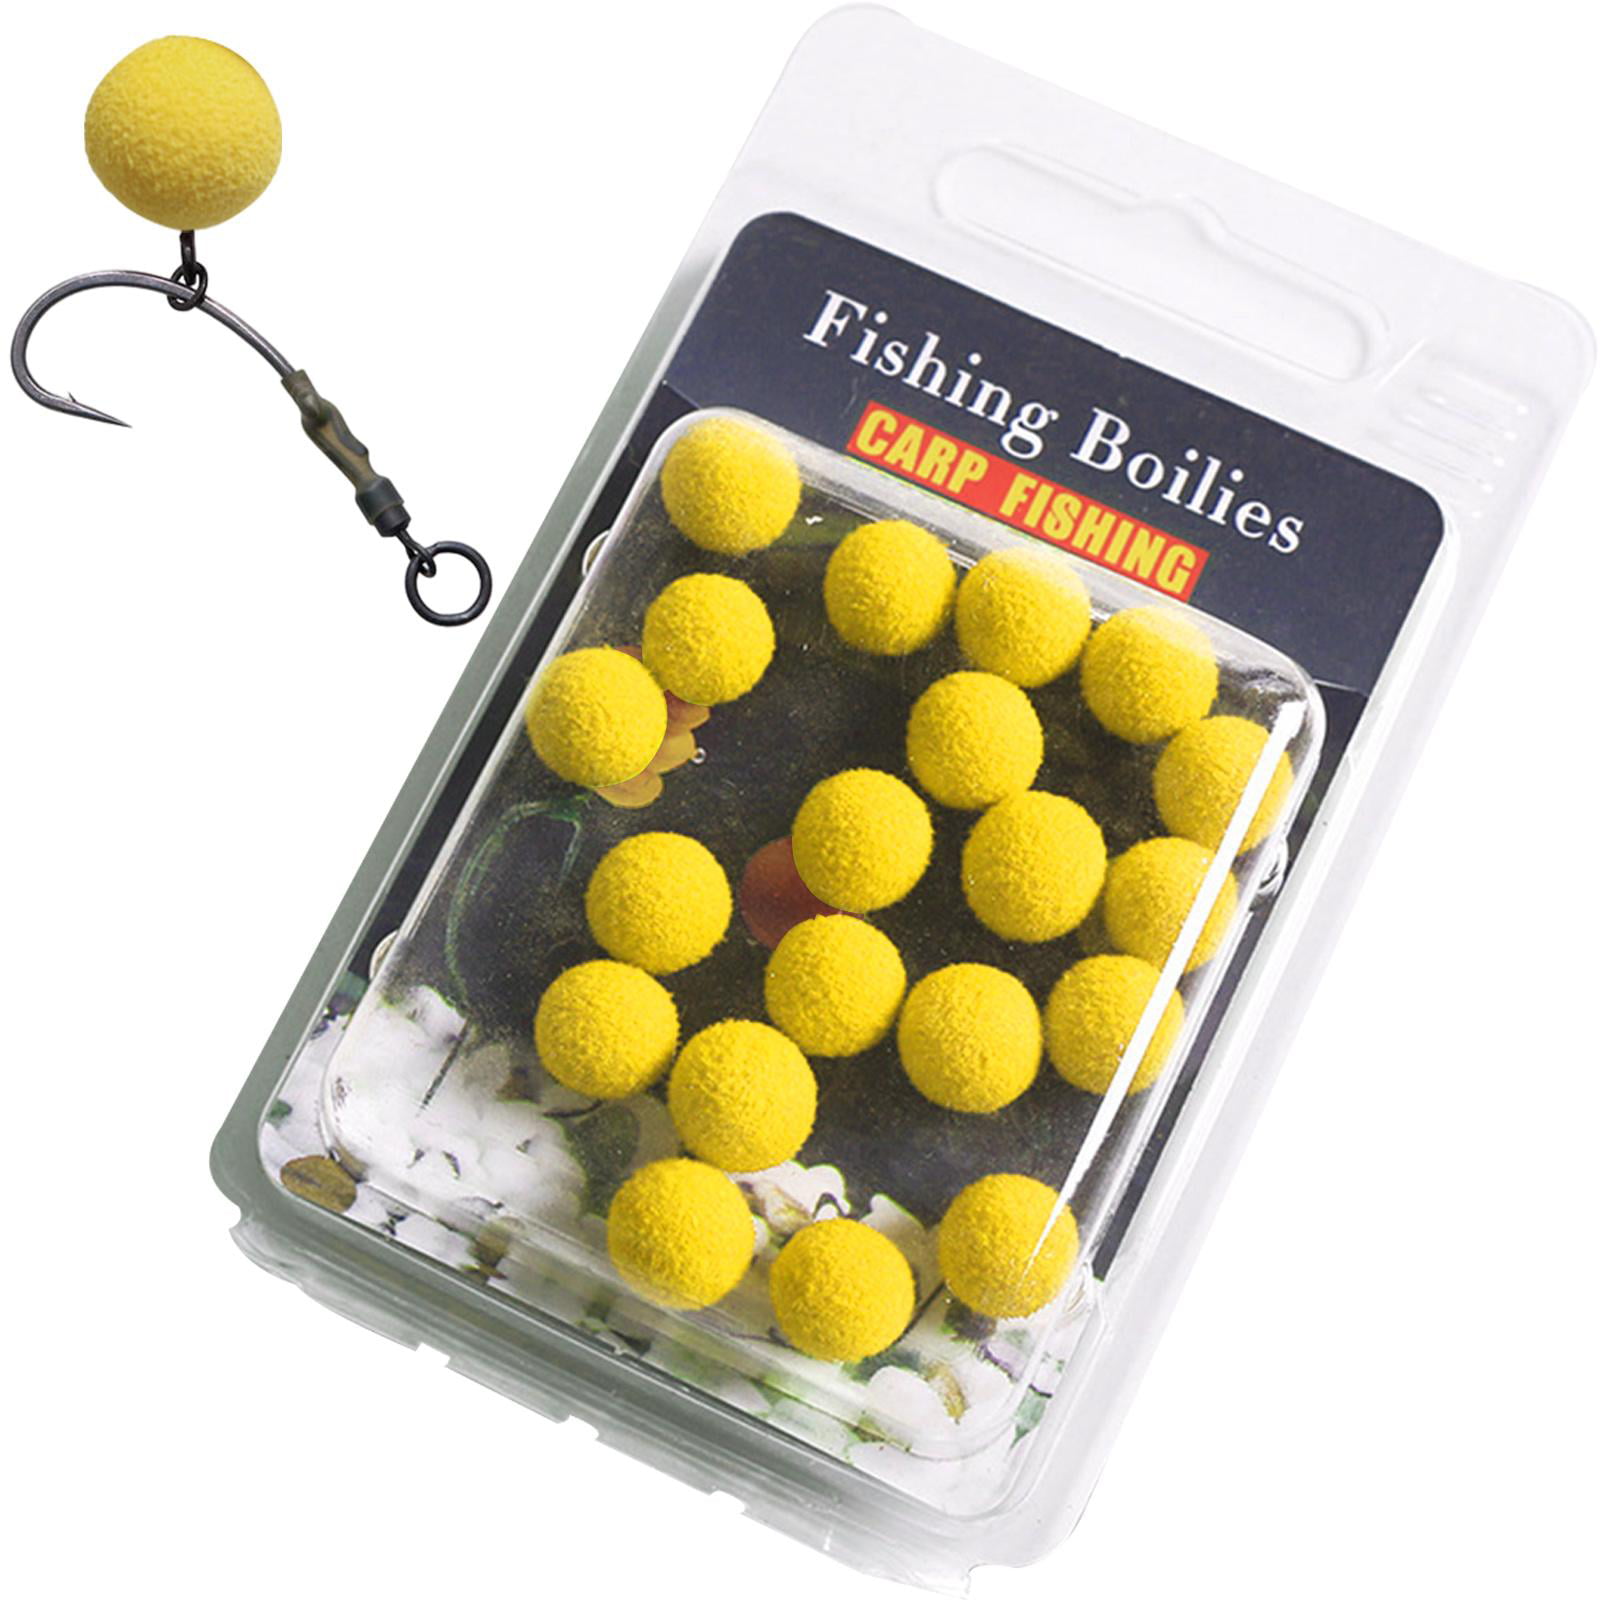 Fishing Beads Floating | 20 Pieces Fishing Rig Beads Fishing Lure Tackle |  Fishing Floats for Surf Fishing Live Bait Rig Making Accessories